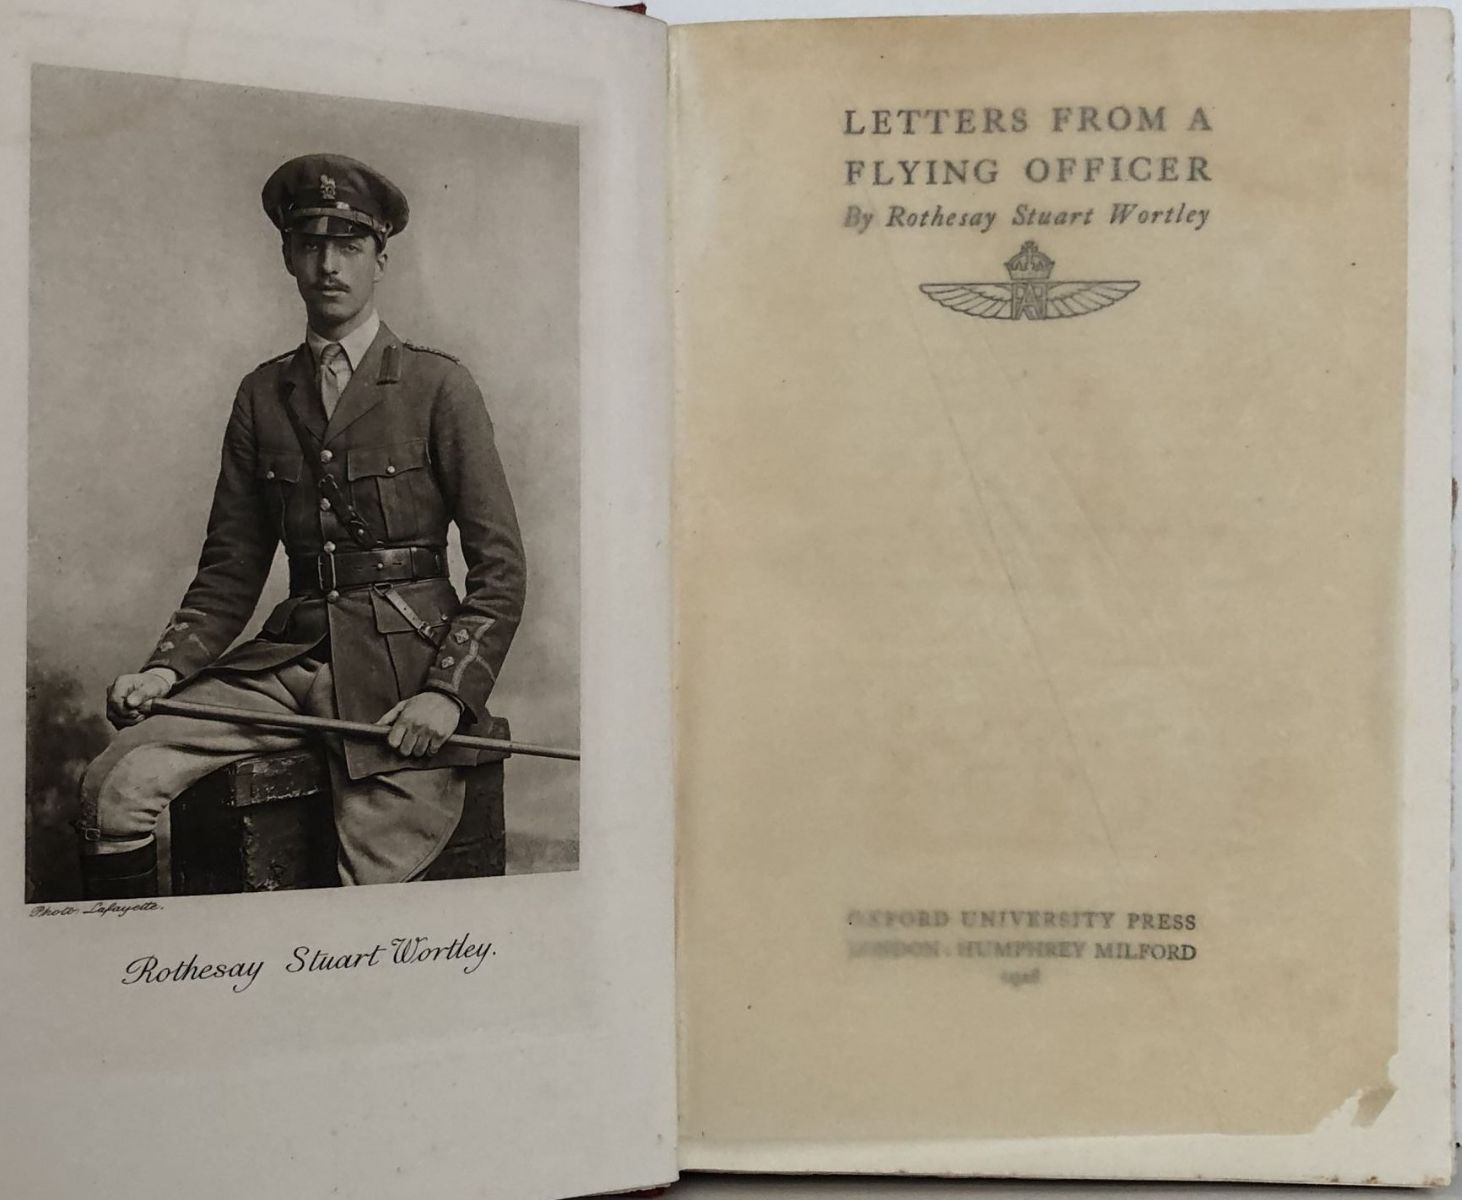 LETTERS FROM A FLYING OFFICER